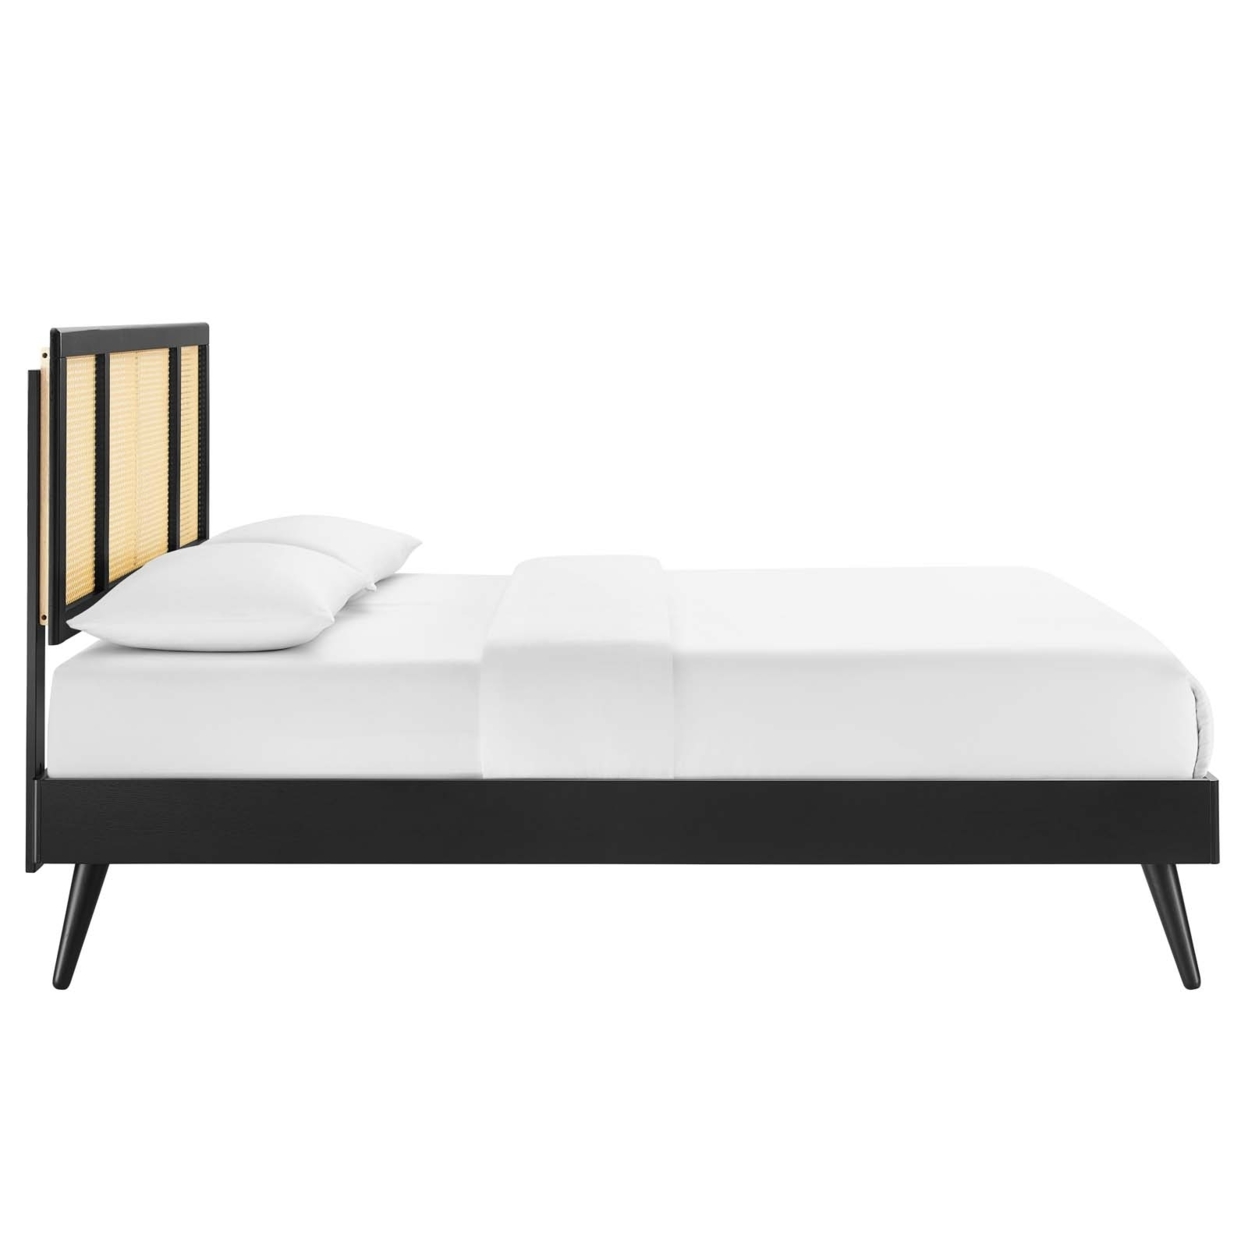 Kelsea Cane And Wood Full Platform Bed With Splayed Legs, Black